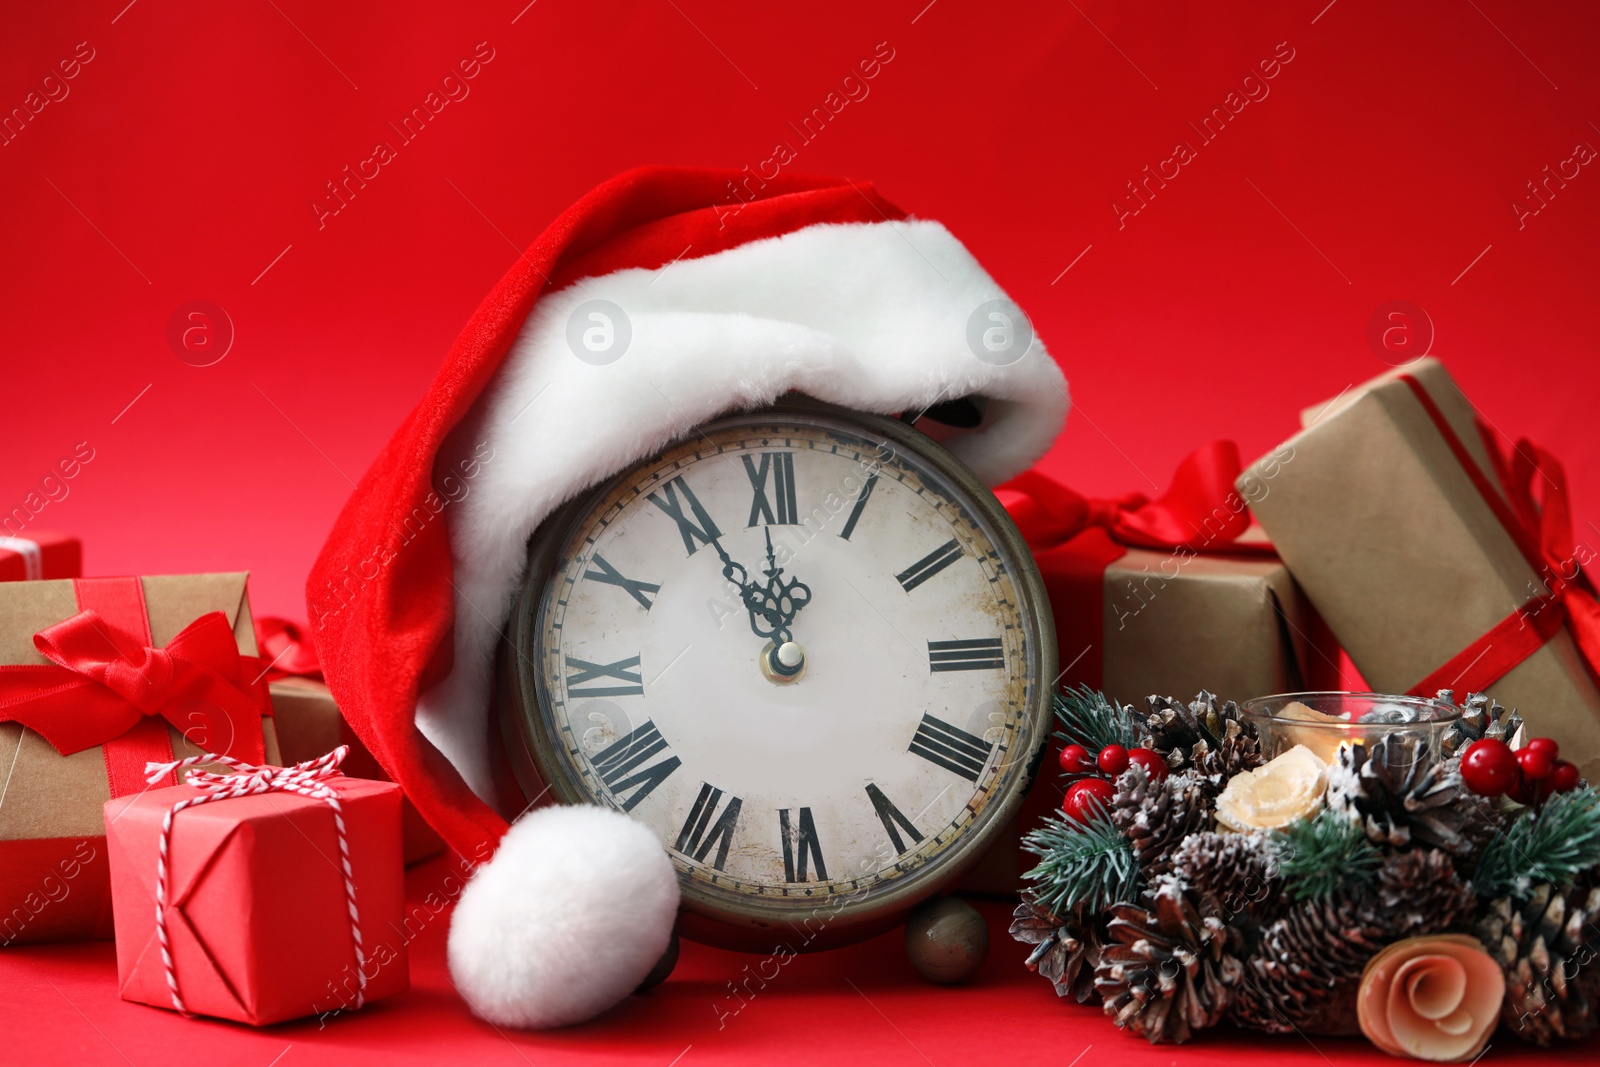 Photo of Alarm clock, gifts and festive decor on red background. New Year countdown